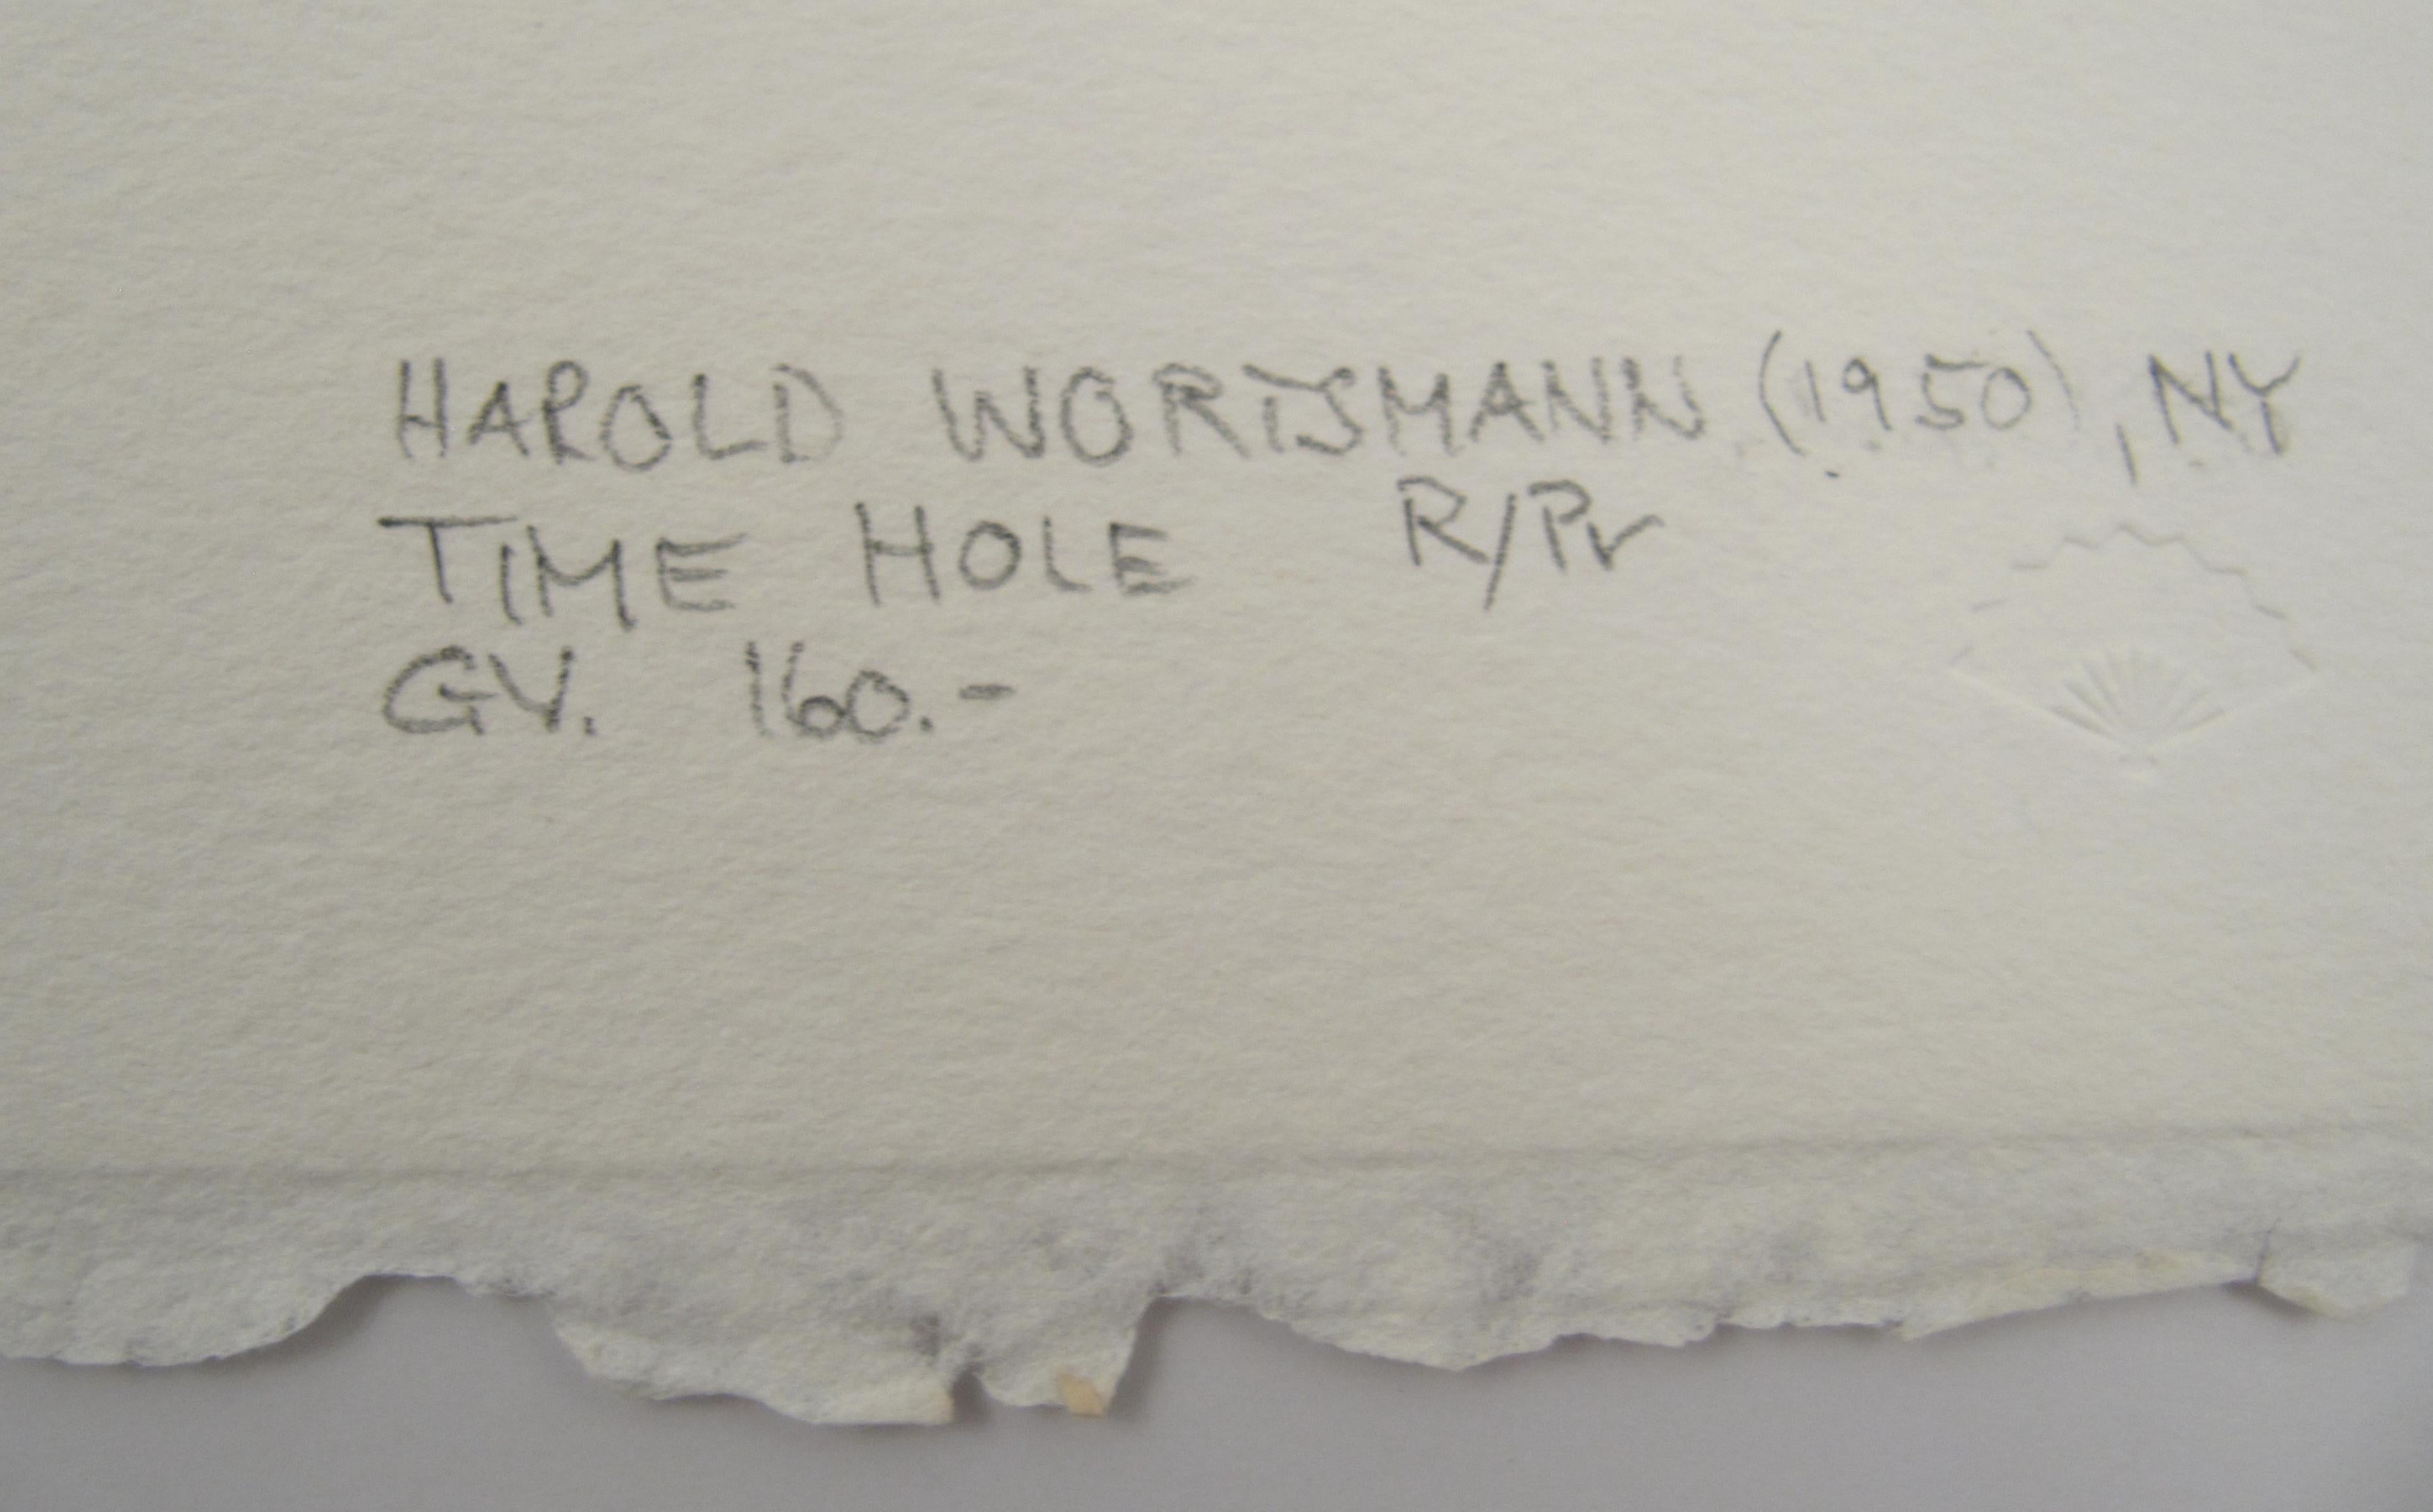 Harold Wortsmann (USA,  1950) - Limited Colored Engraving 16/20 - Time Hole For Sale 3